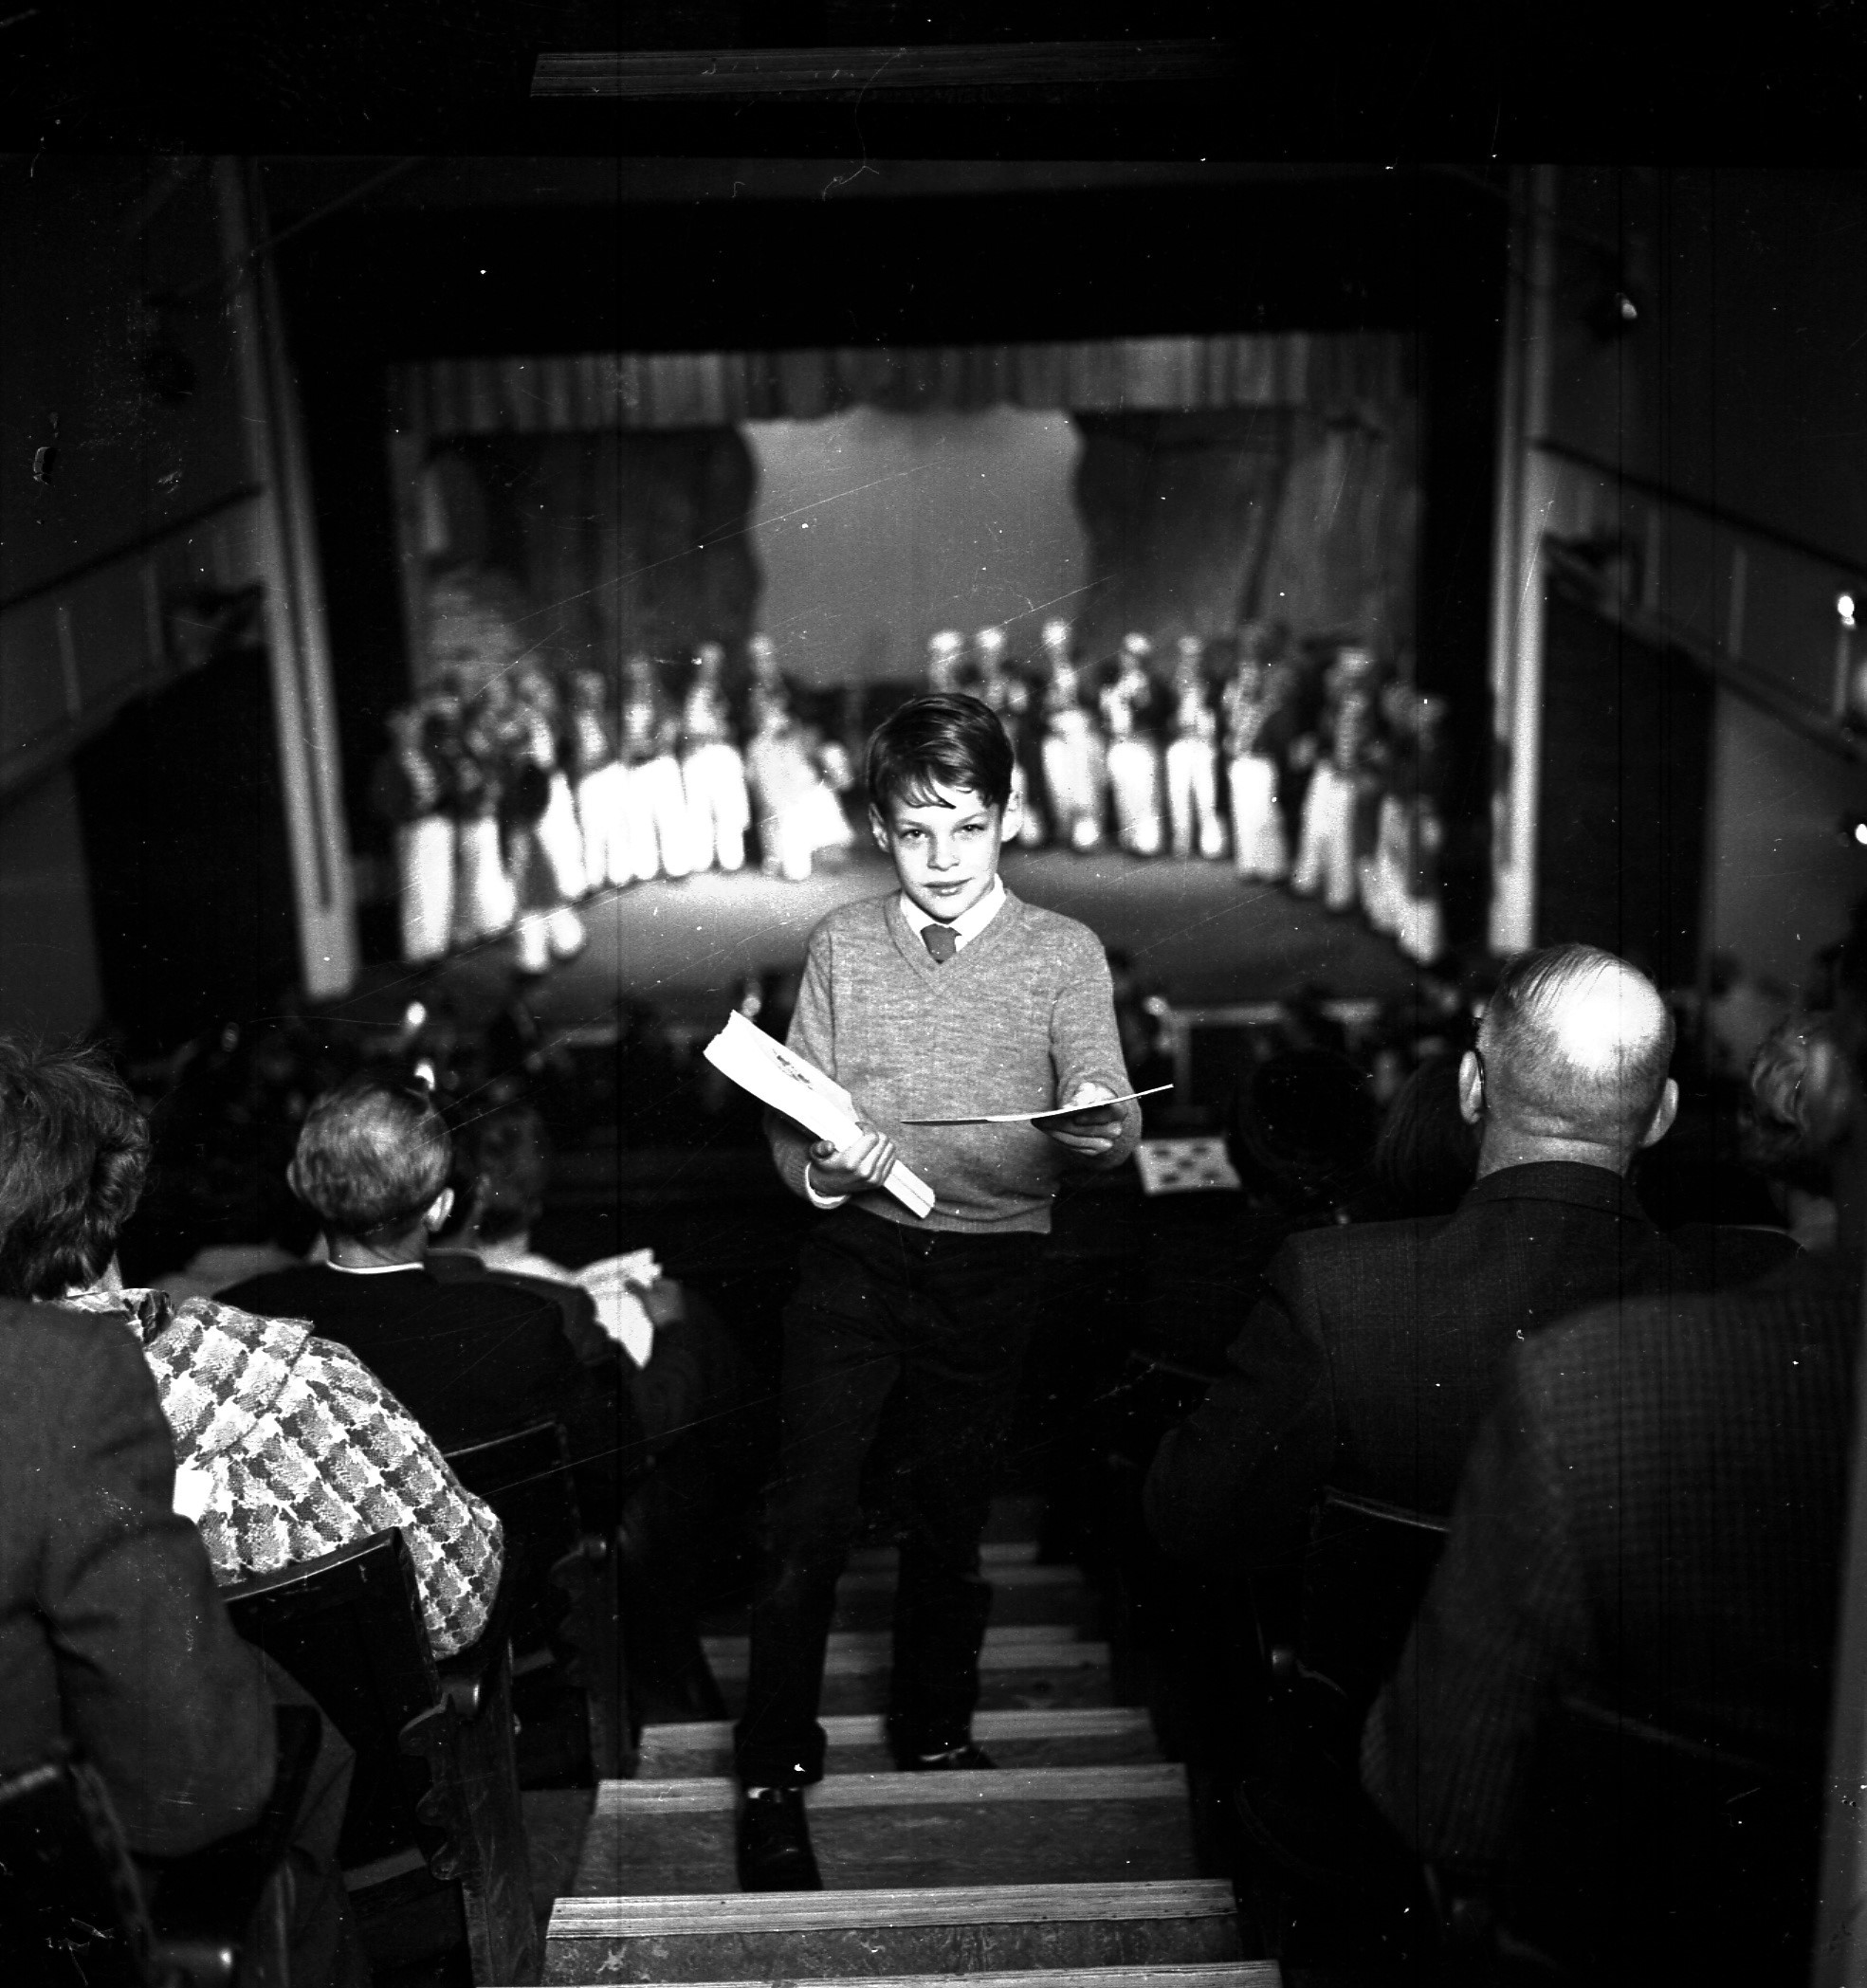 Gareth Valentine is in the balcony during a performance of Pirates of Penzance at George Edwards Hall, October 1967. He went on to be a renowned composer, arranger, conductor and musical director.